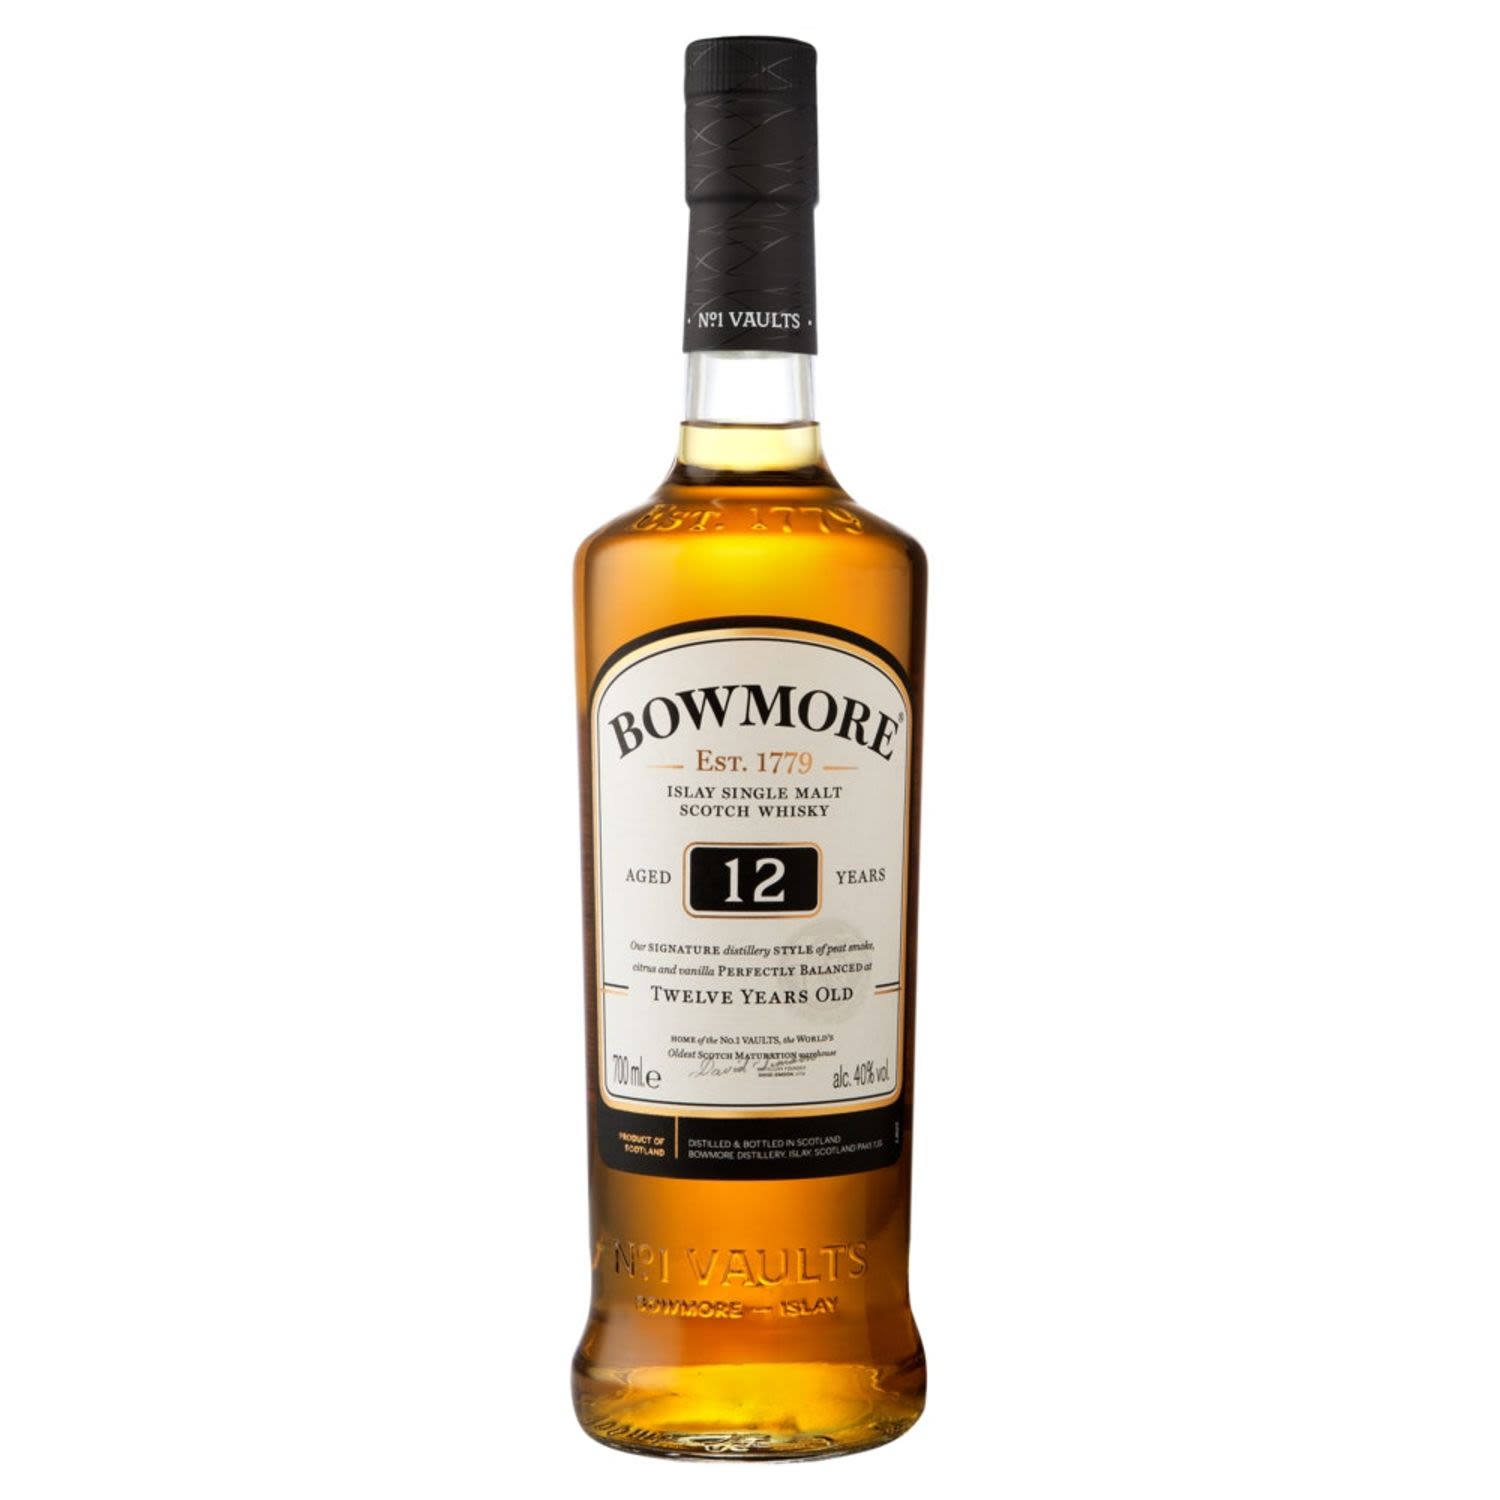 BOWMORE Balance Whiskey 12 year old is perfectly balanced with subtle lemon, honey and peat smoke. Leaving behind a long and mellow finish.<br /> <br />Alcohol Volume: 40.00%<br /><br />Pack Format: 6 Pack<br /><br />Standard Drinks: 22.1</br /><br />Pack Type: Bottle<br /><br />Country of Origin: Scotland<br />